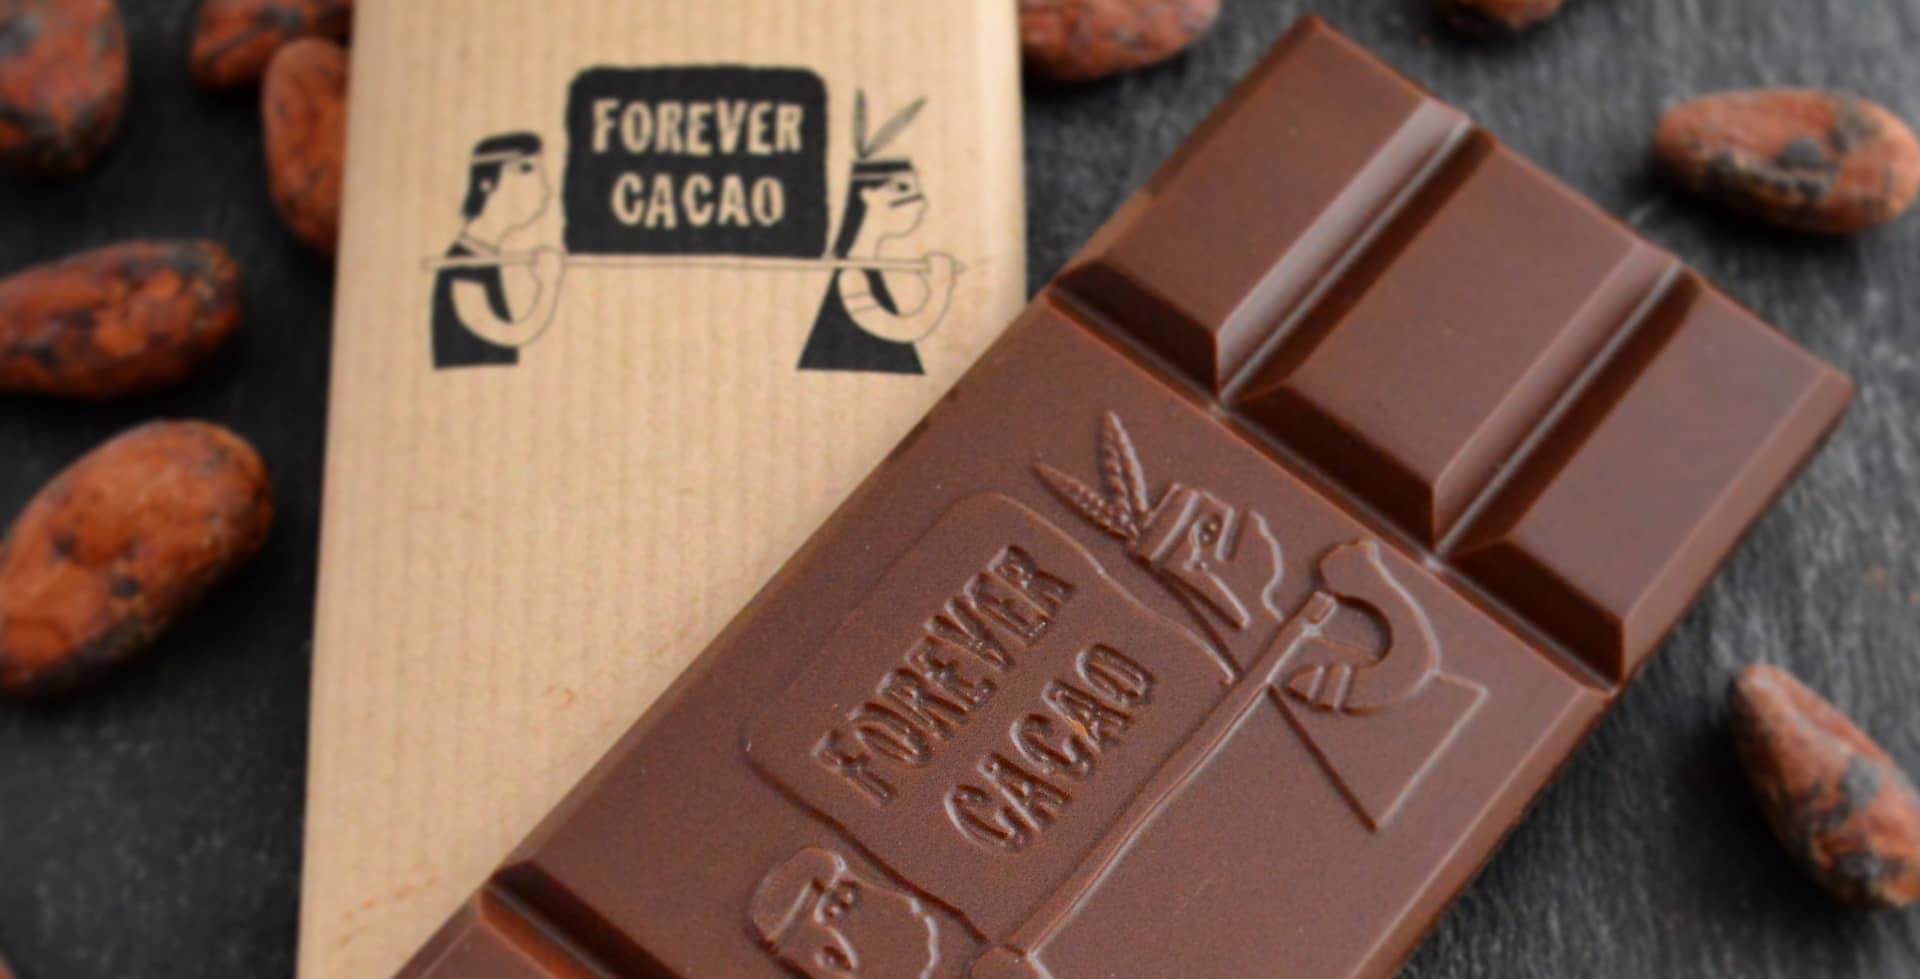 Forever Cacao